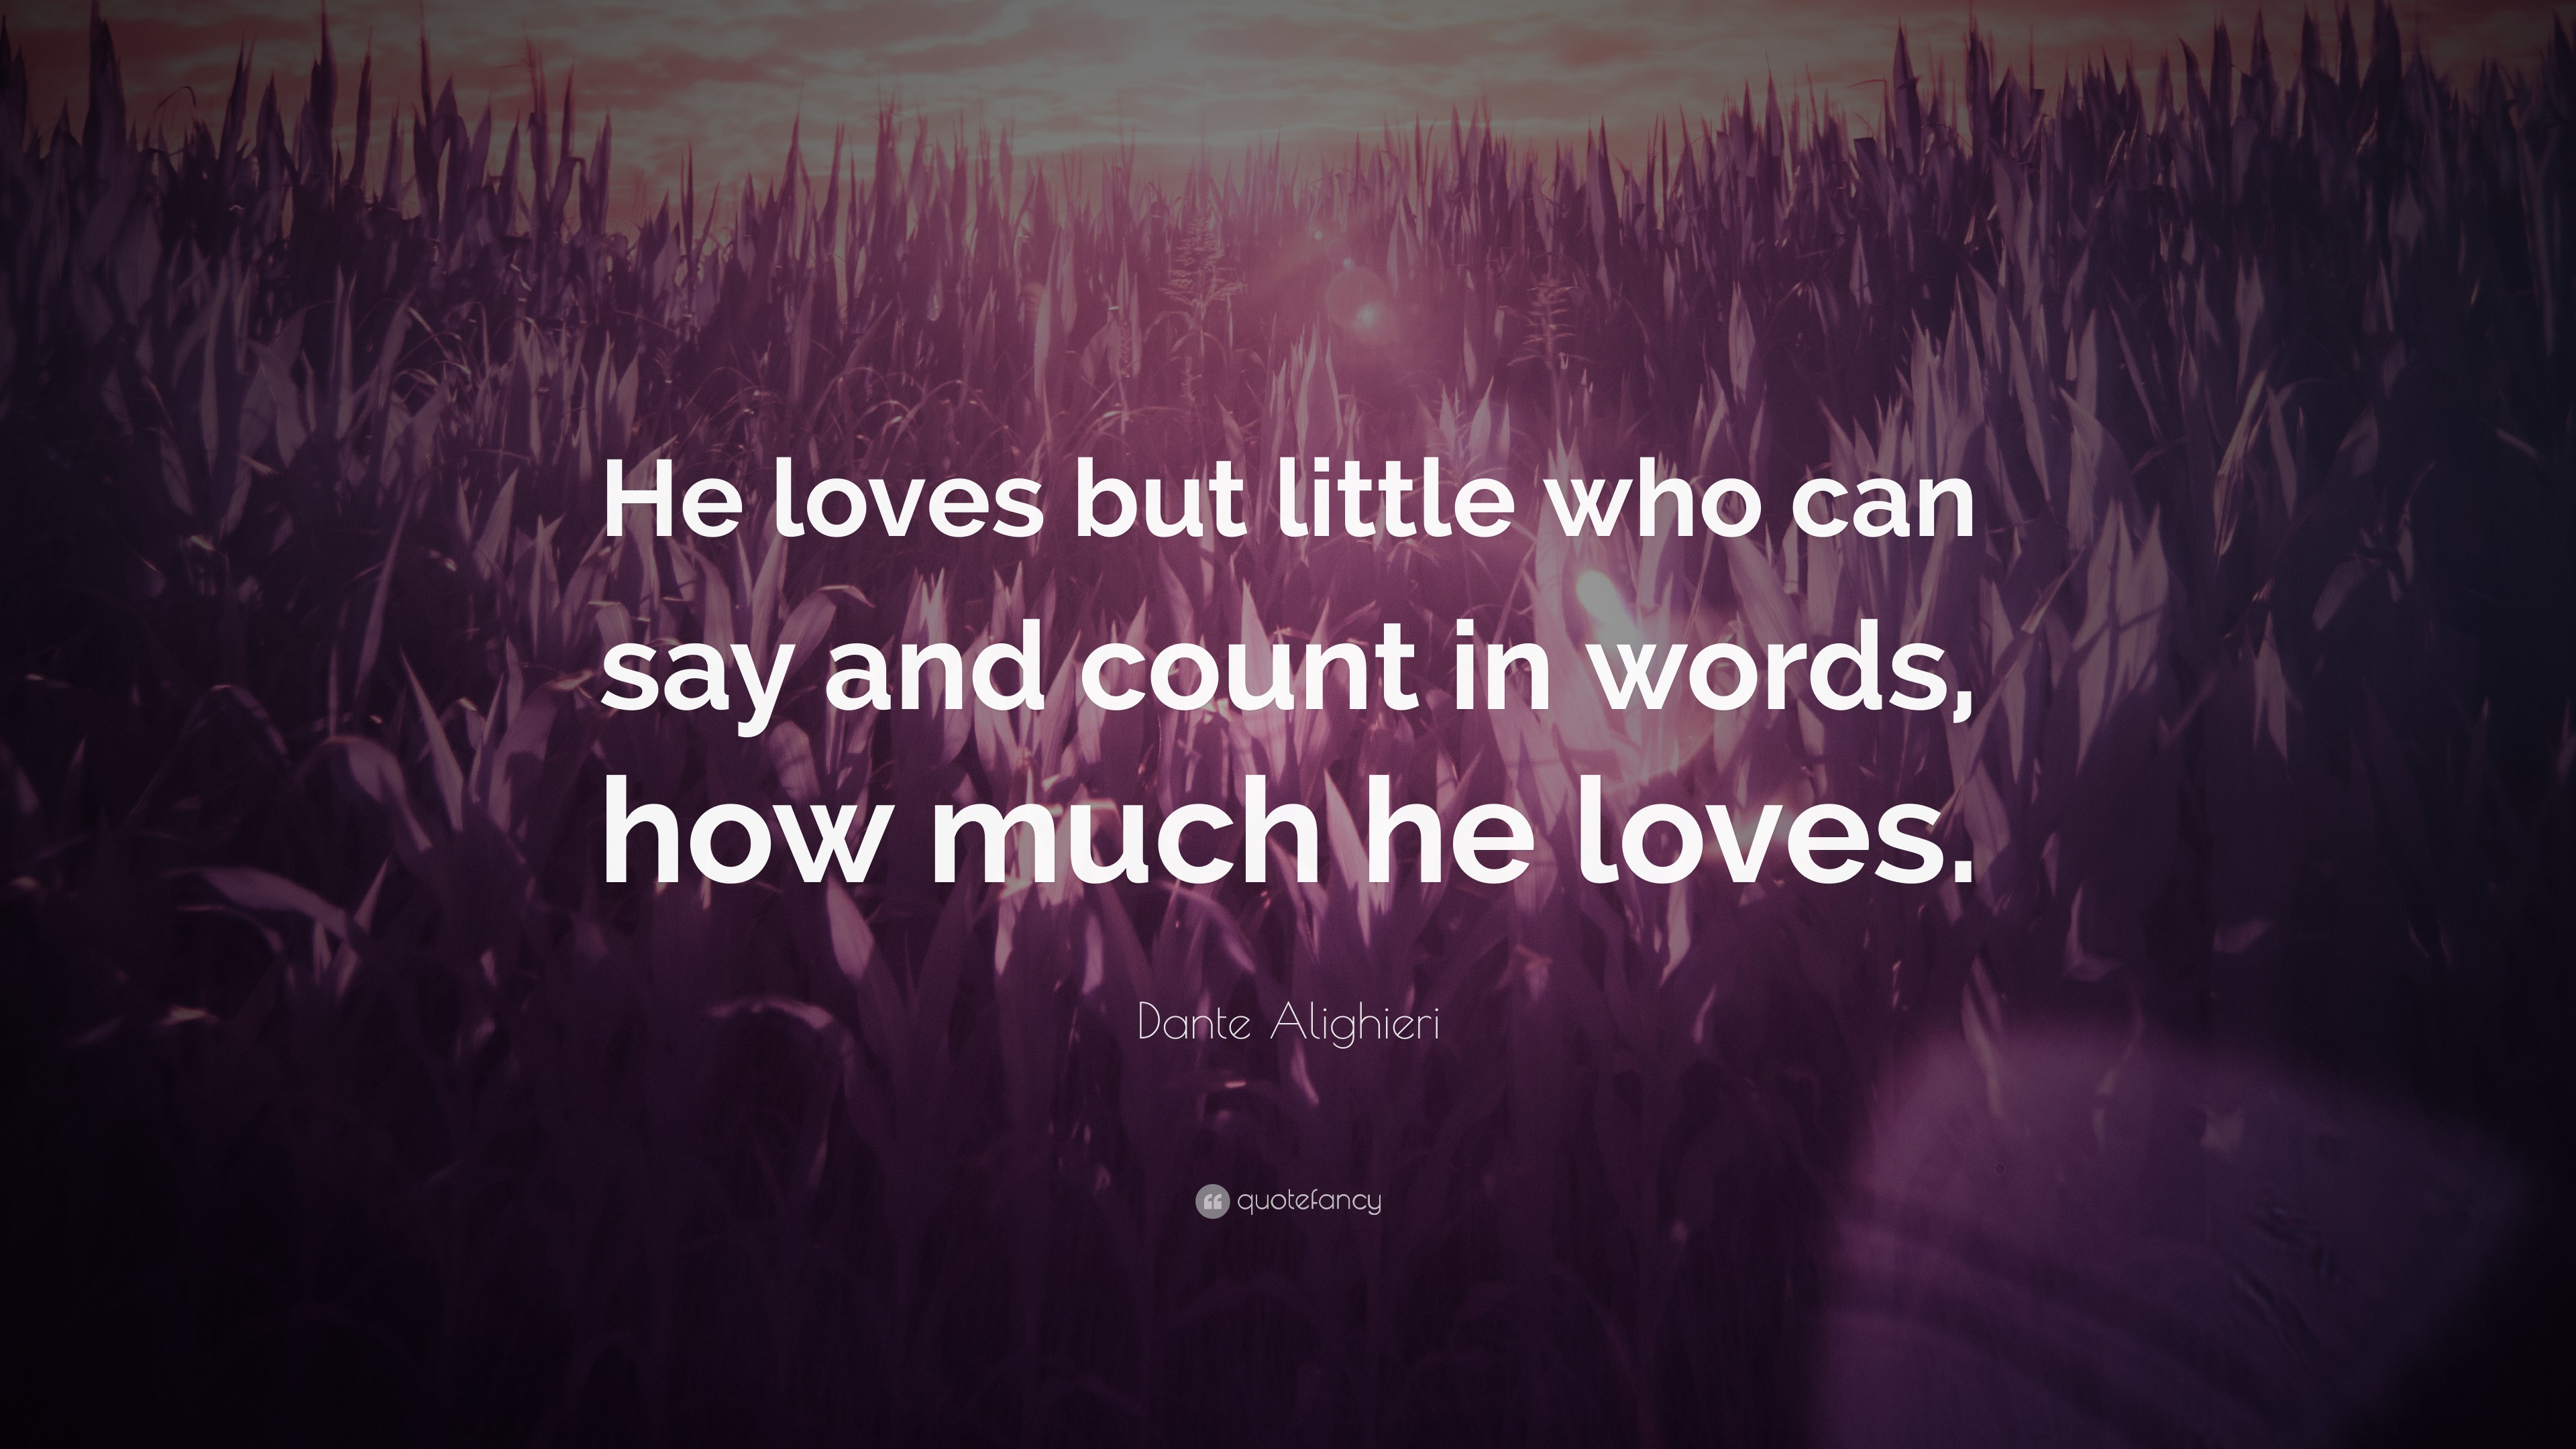 Dante Alighieri Quote: “He loves but little who can say and count in ...